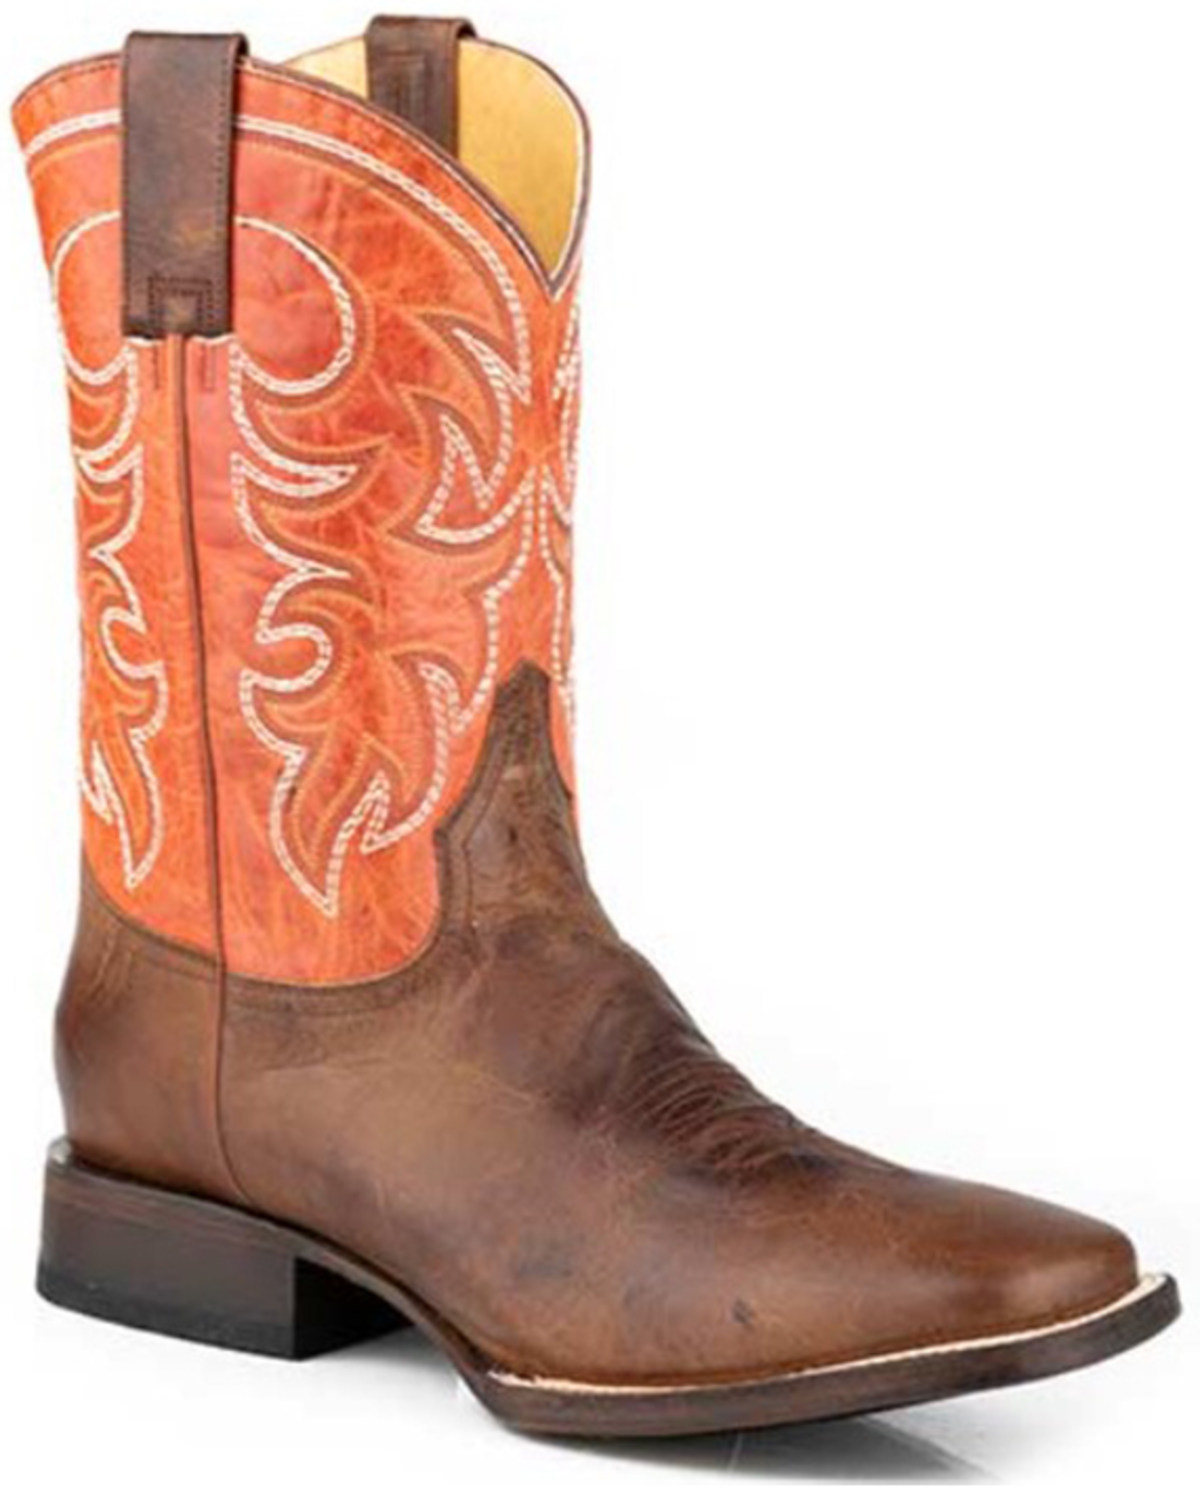 Roper Men's Rowdy Performance Western Boots - Broad Square Toe